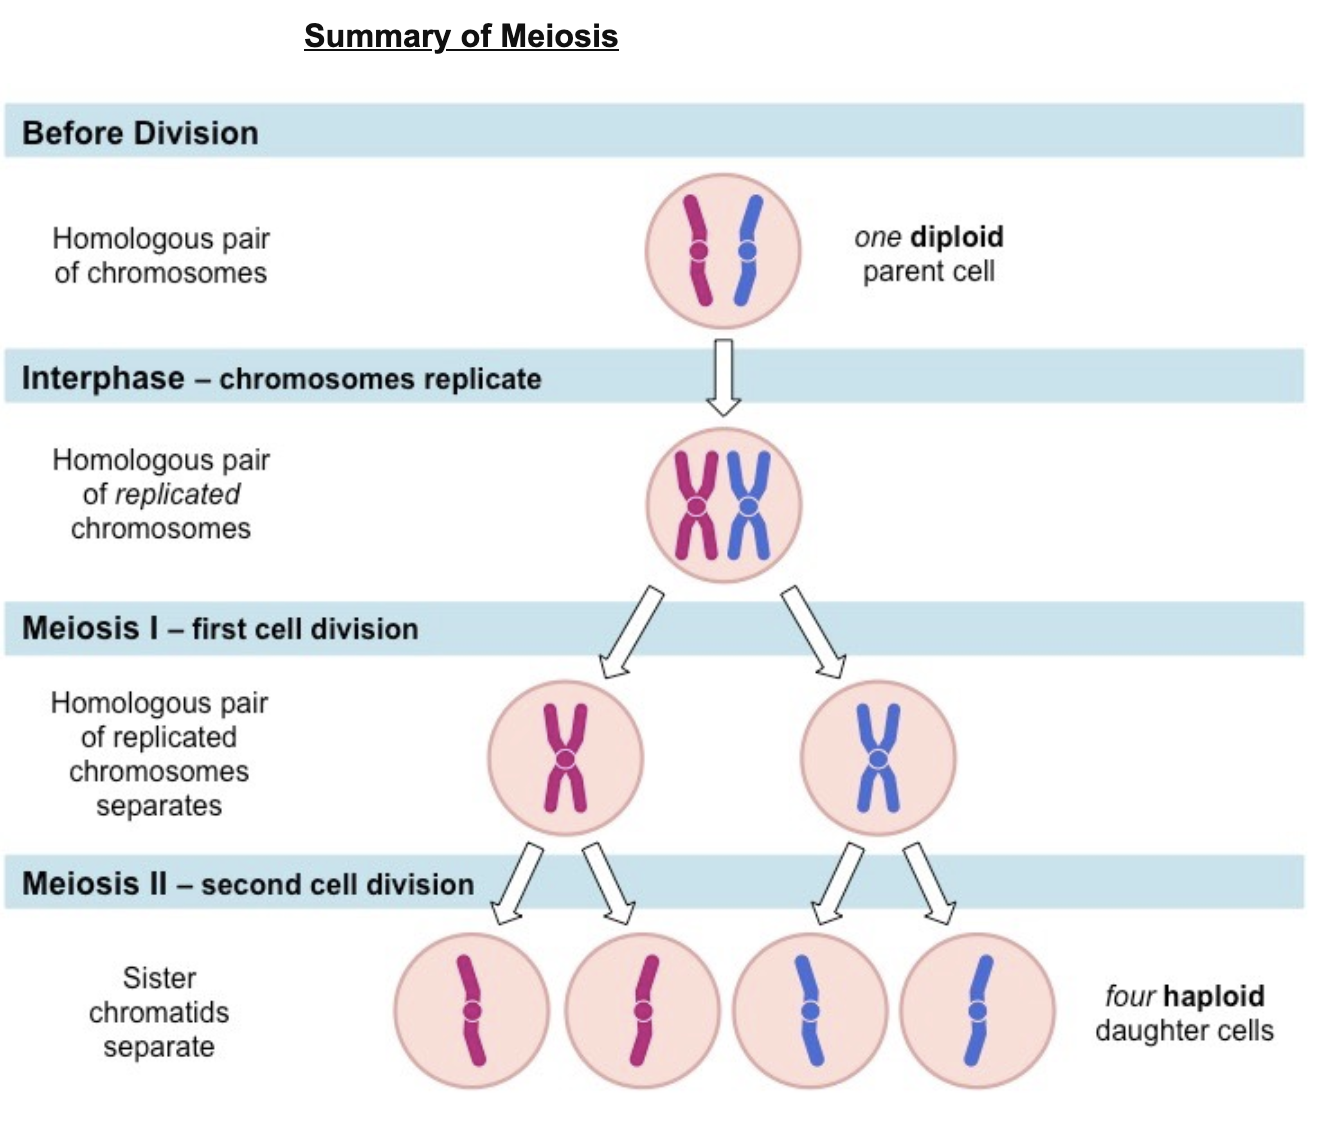 <ul><li><p>Meiosis is the process by which sex cells (gametes) are made in the reproductive organs</p></li><li><p>reduction division of diploid cells into 4 genetically unique haploid cells</p></li></ul><p>two cellular divisions</p><ol><li><p>halve chromosomes in Anaphase 1</p></li><li><p>chromosomes split into chromatids in Anaphase 2</p></li></ol>